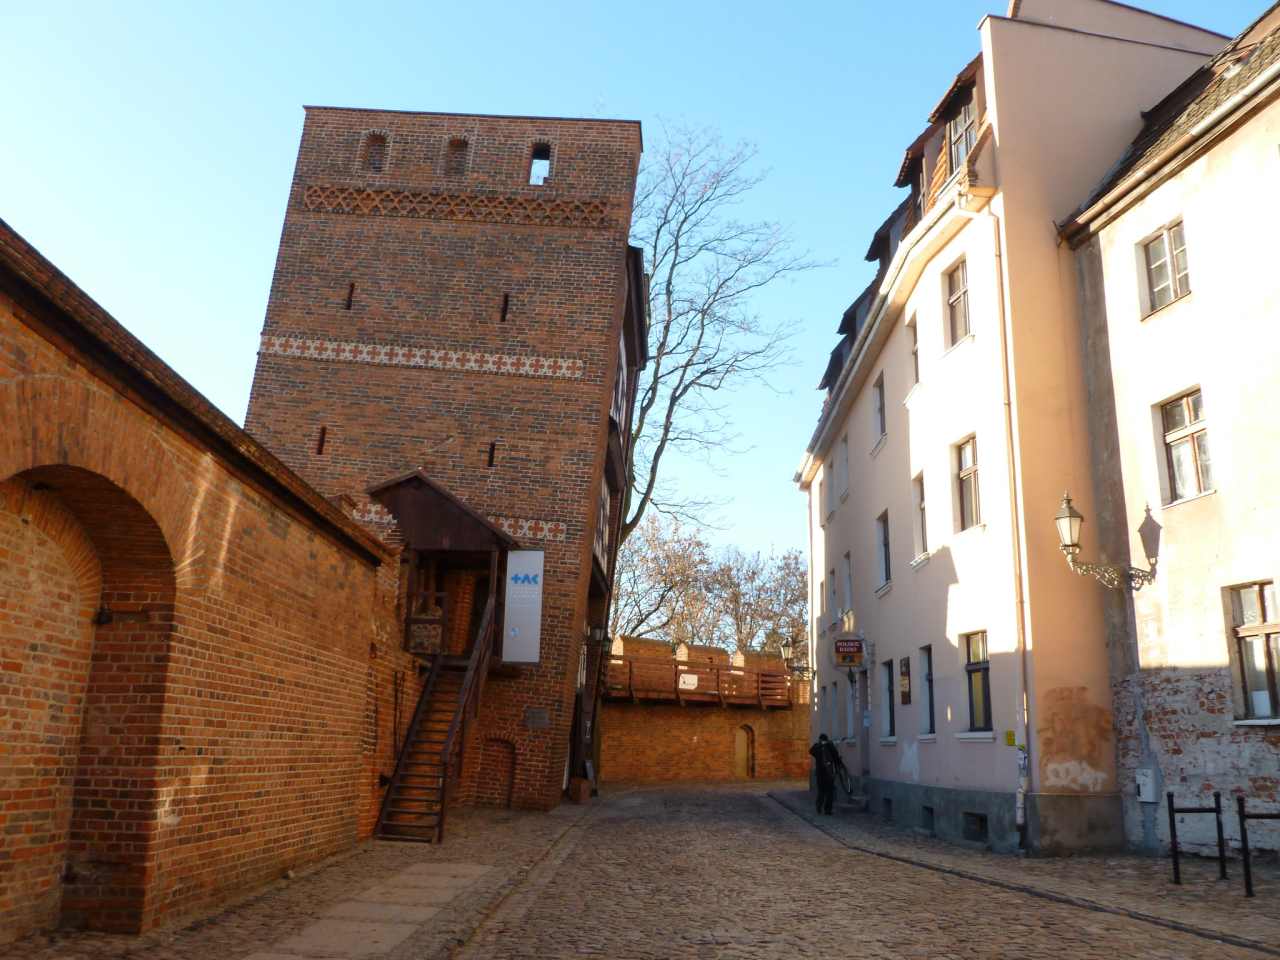 Leaning Tower in Torun, Poland